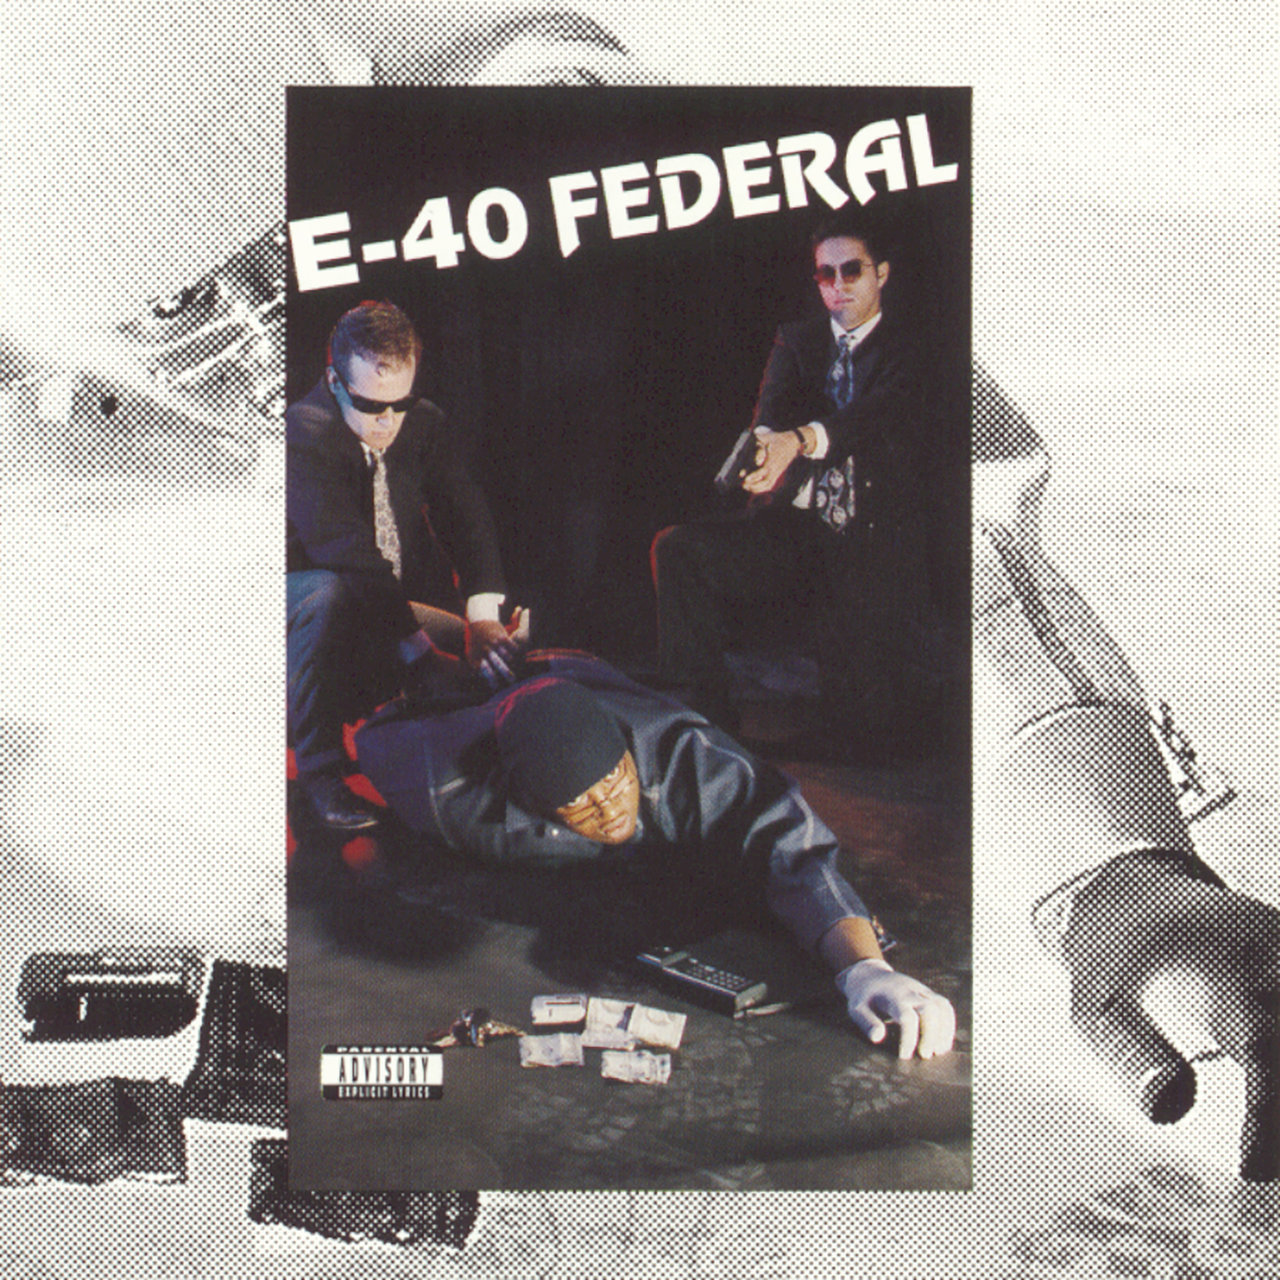 E-40 - Federal (Re-issue) (Cover)